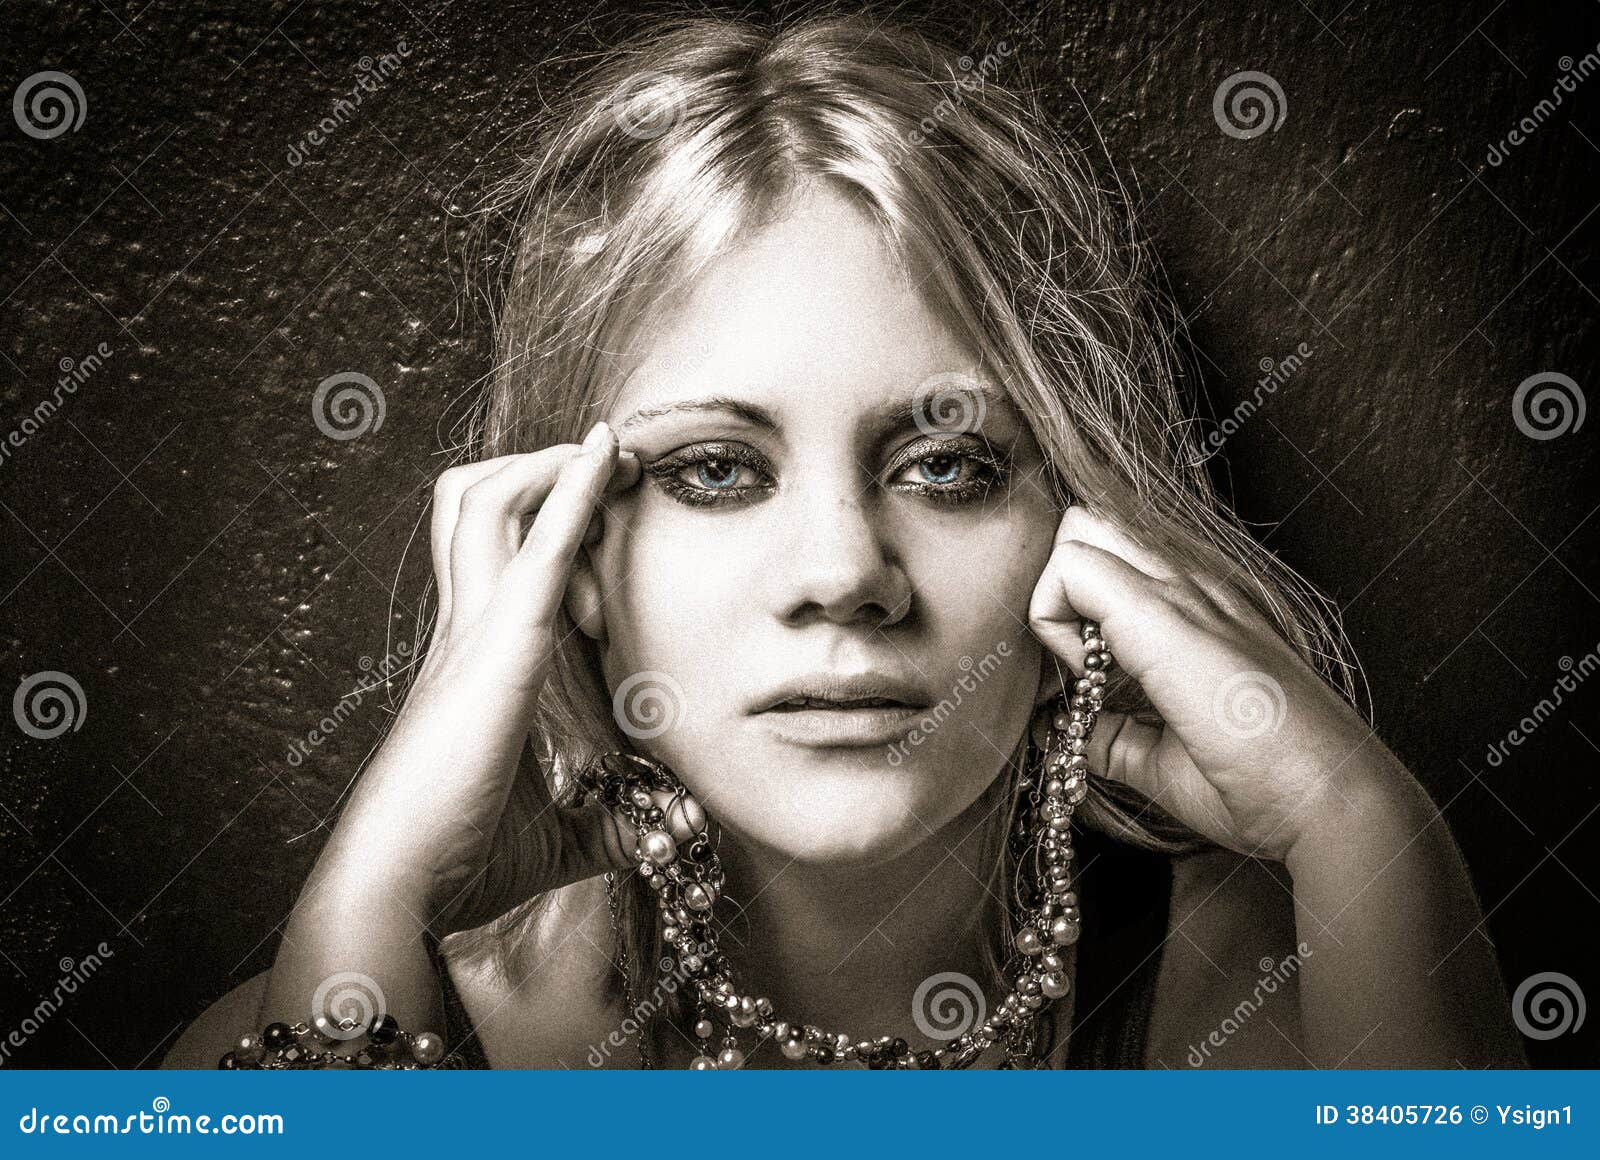 Beautiful Woman Looking Straight Into The Camera With An Intense Stock Photo Image Of Closeup